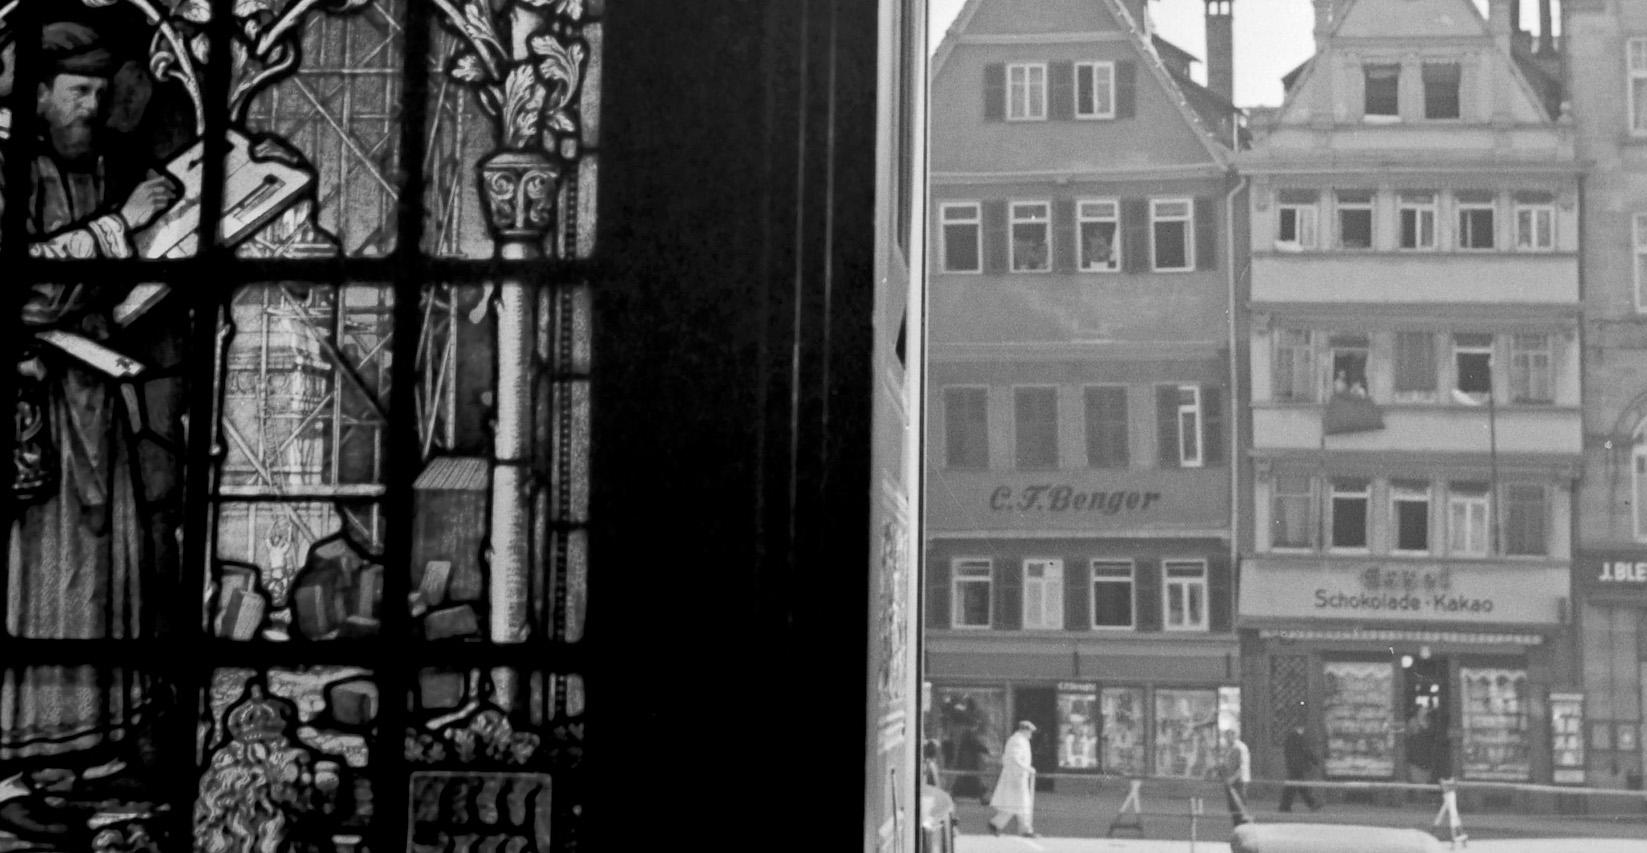 View to shopping passage, Stuttgart Germany 1935, Printed Later - Photograph by Karl Heinrich Lämmel